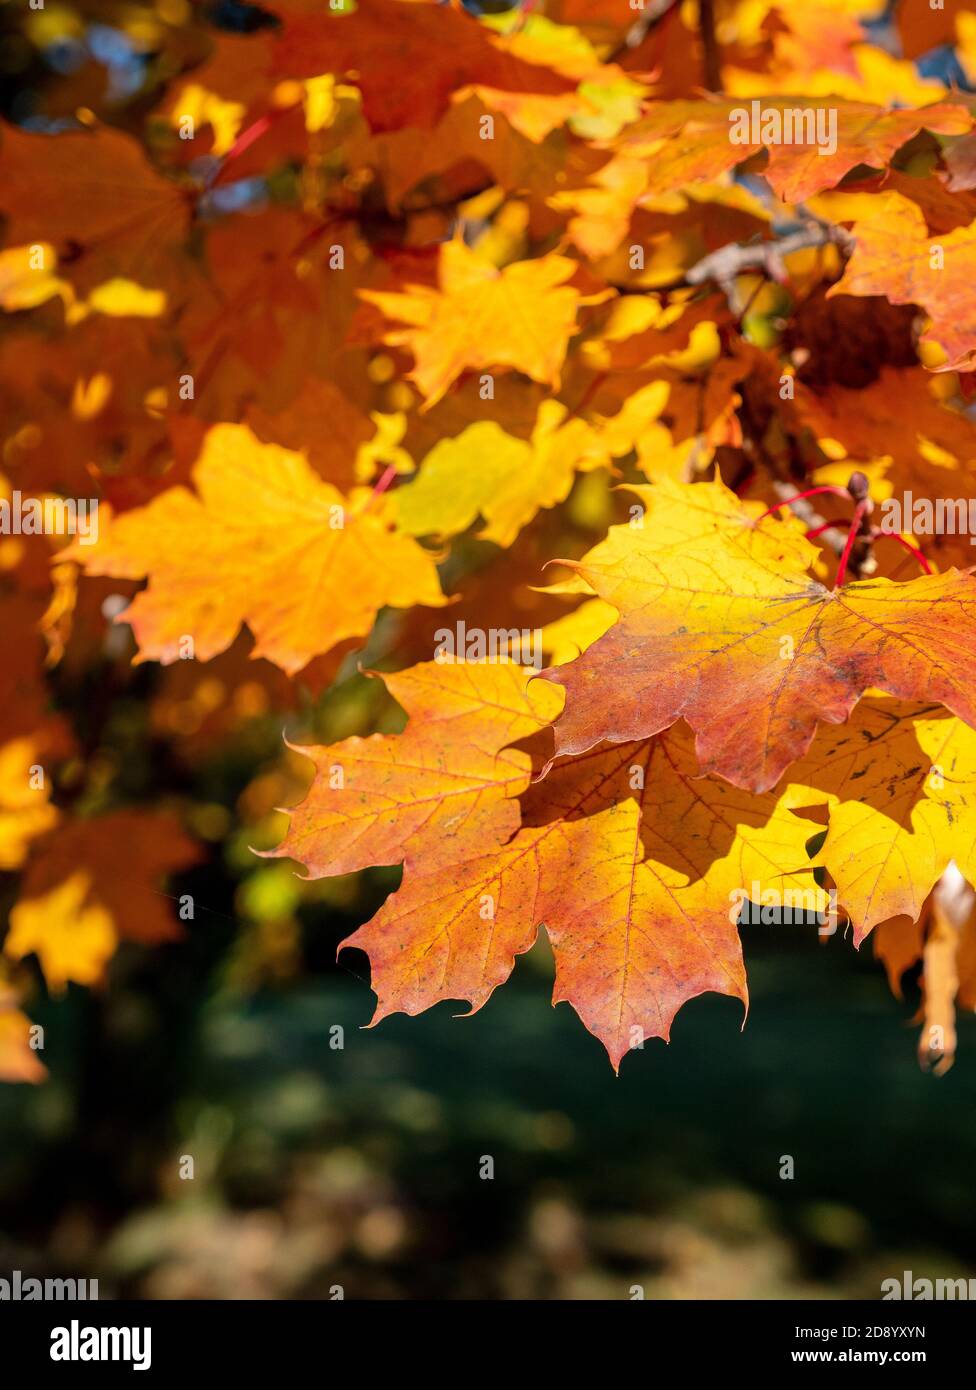 Canadian Maple Tree Leaves In Autumn Fall Colour Close Up Detail Ontario Canada Stock Photo